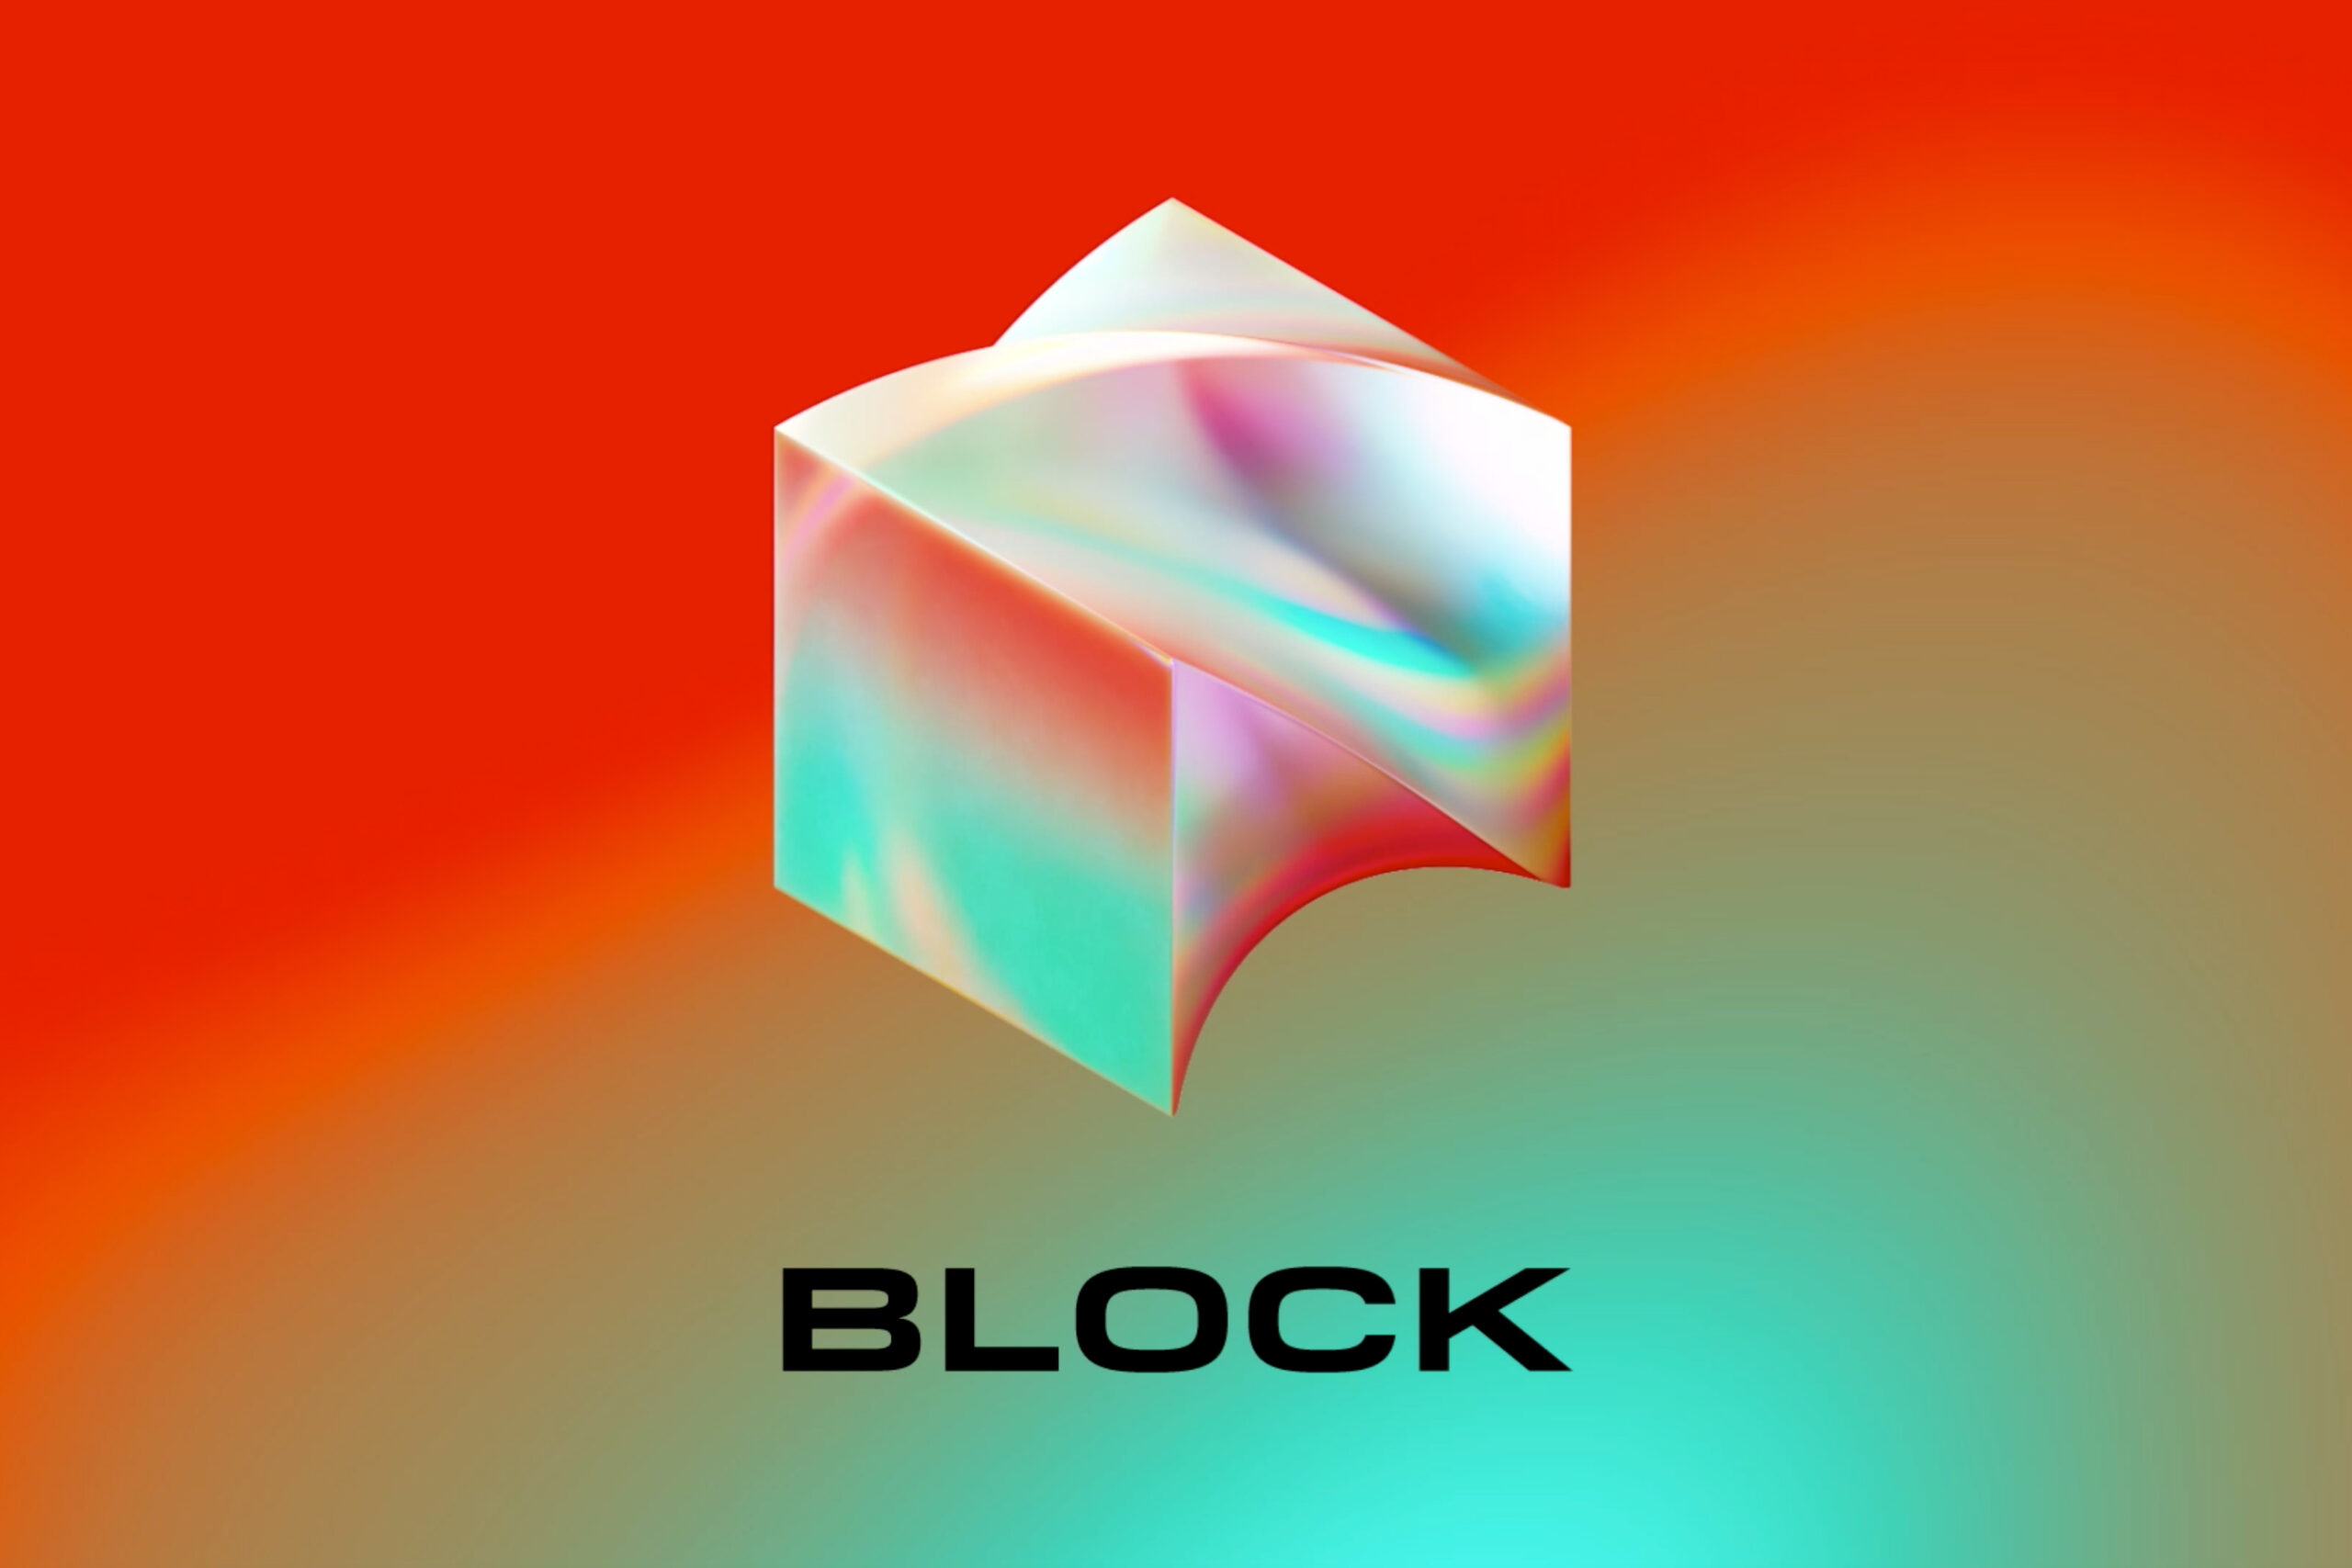 Block, The Fintech Company, Announces Layoffs Amidst Industry Turmoil